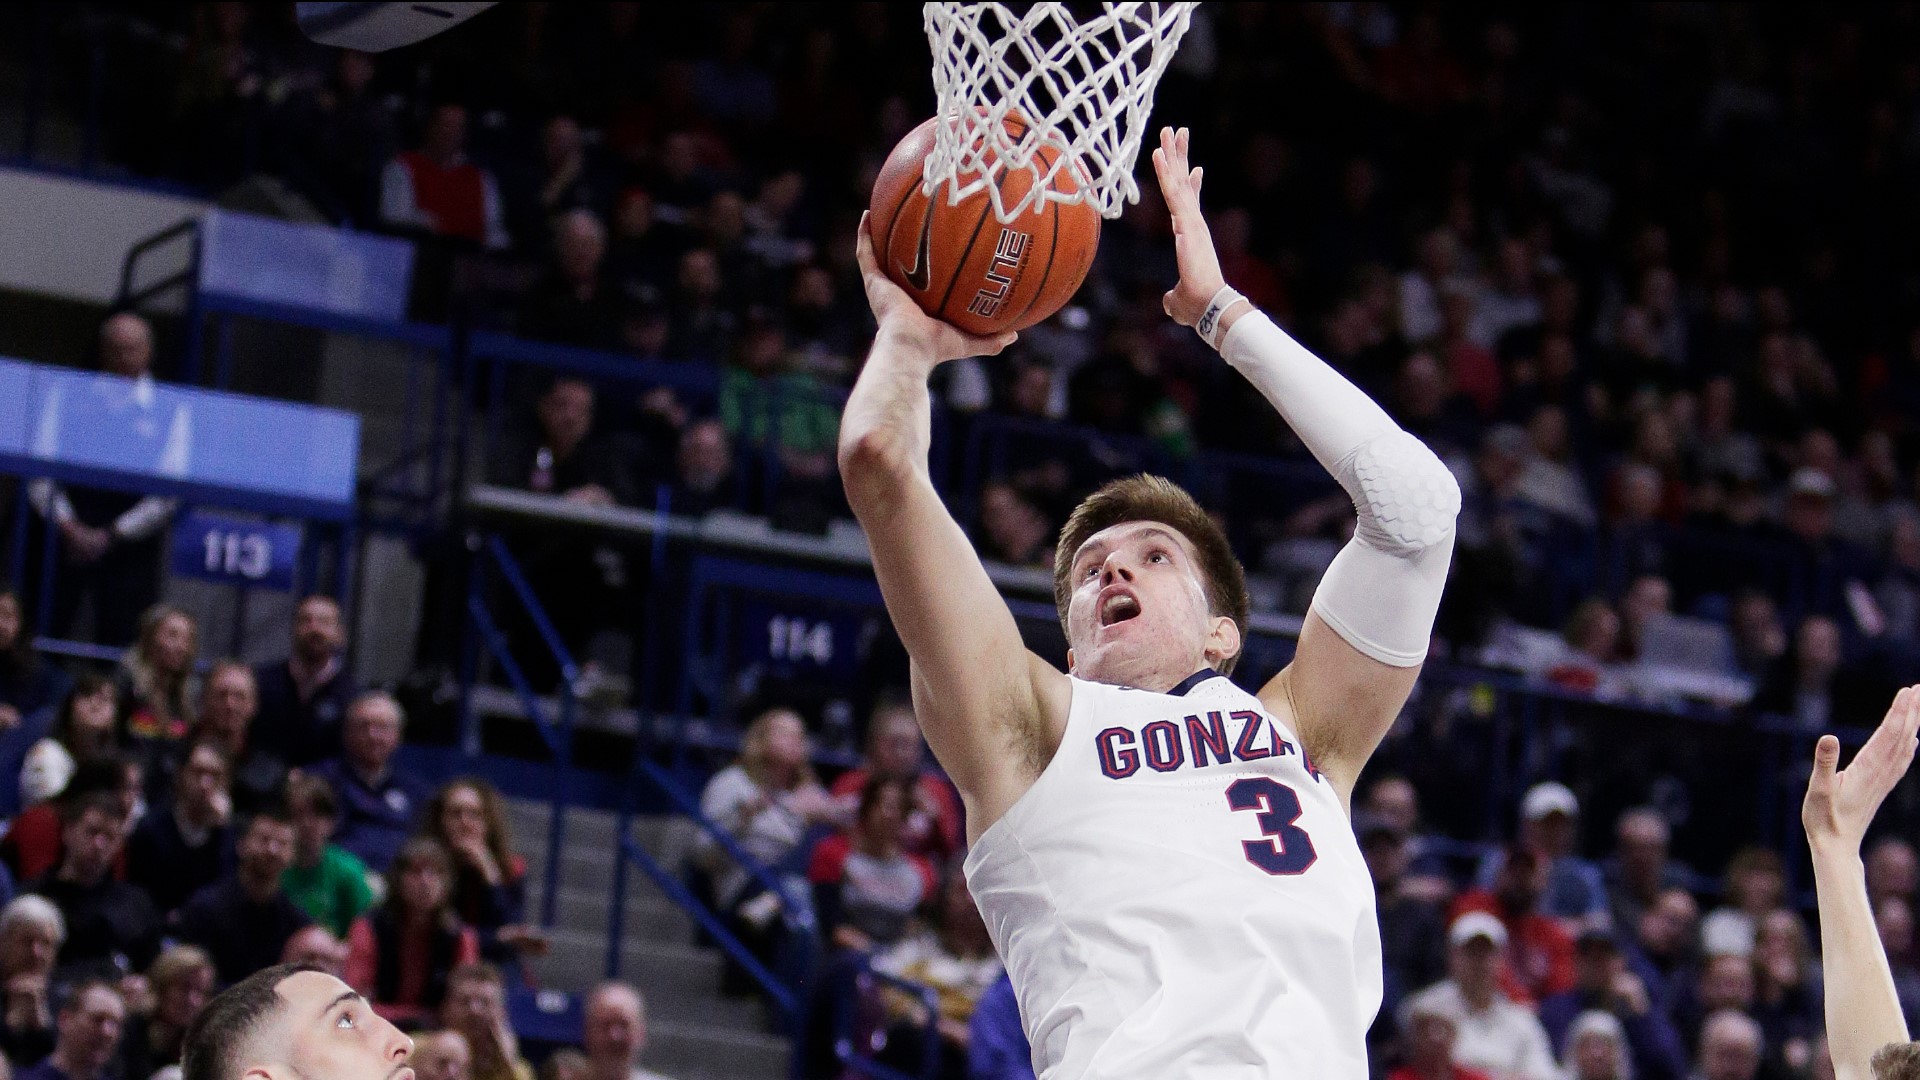 Corey Kispert scored 16 points and Ryan Woolridge had 15 for Gonzaga (28-2, 14-1 WCC), which rebounded from its loss at BYU on Saturday.